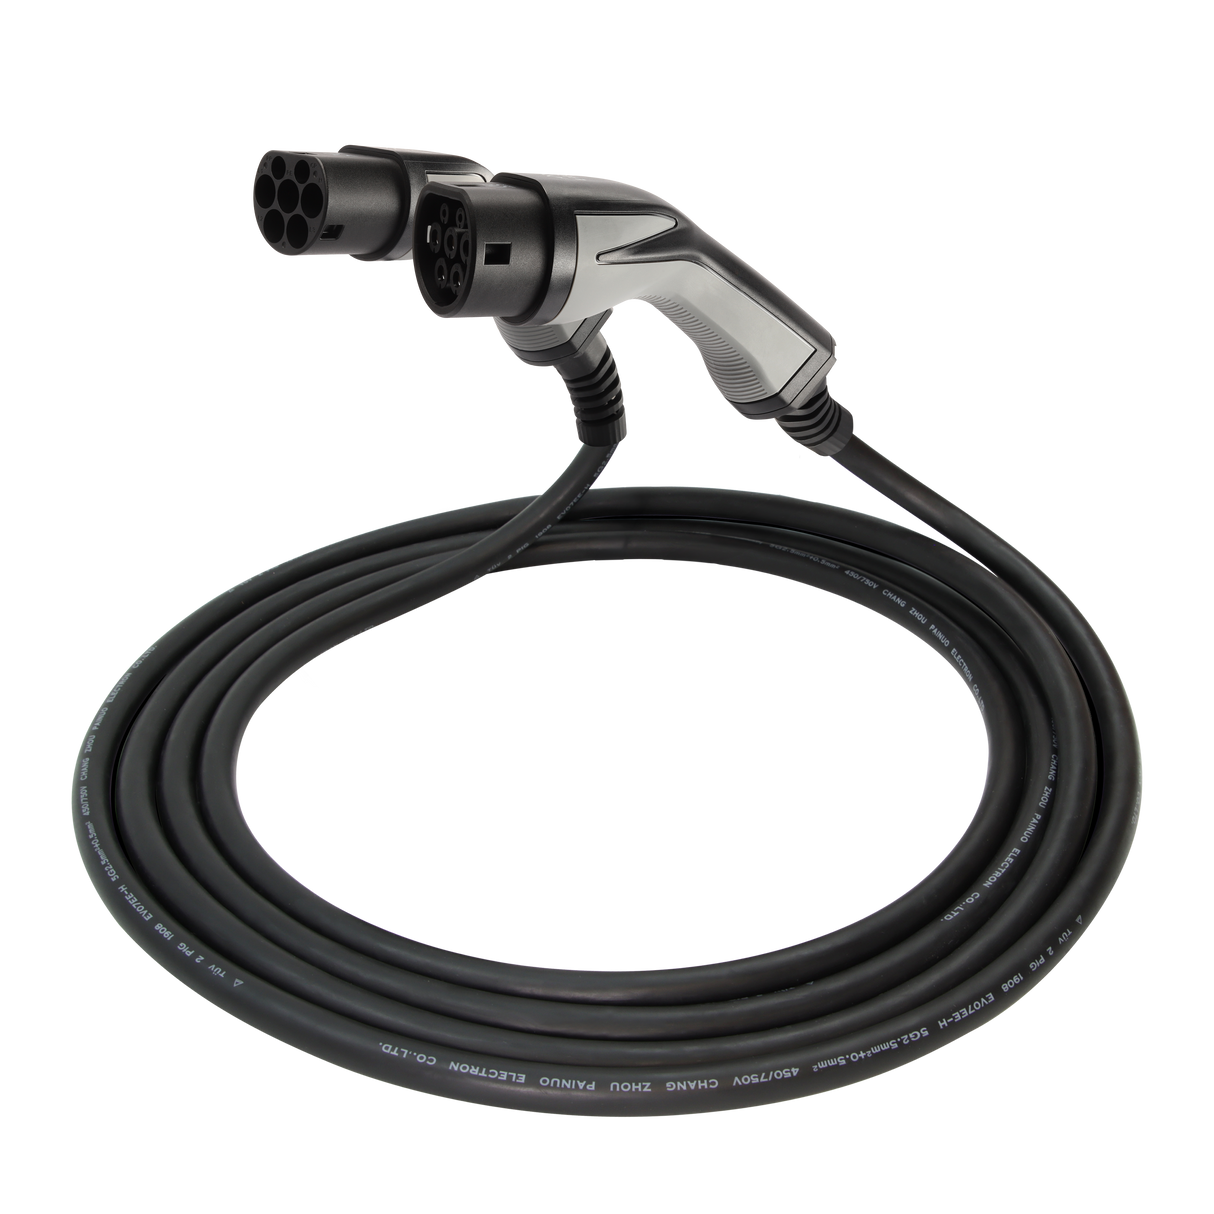 Câble de charge Bentley Flying Spur - Erock Pro Type 2 - 16A 3 phases (11 kW)